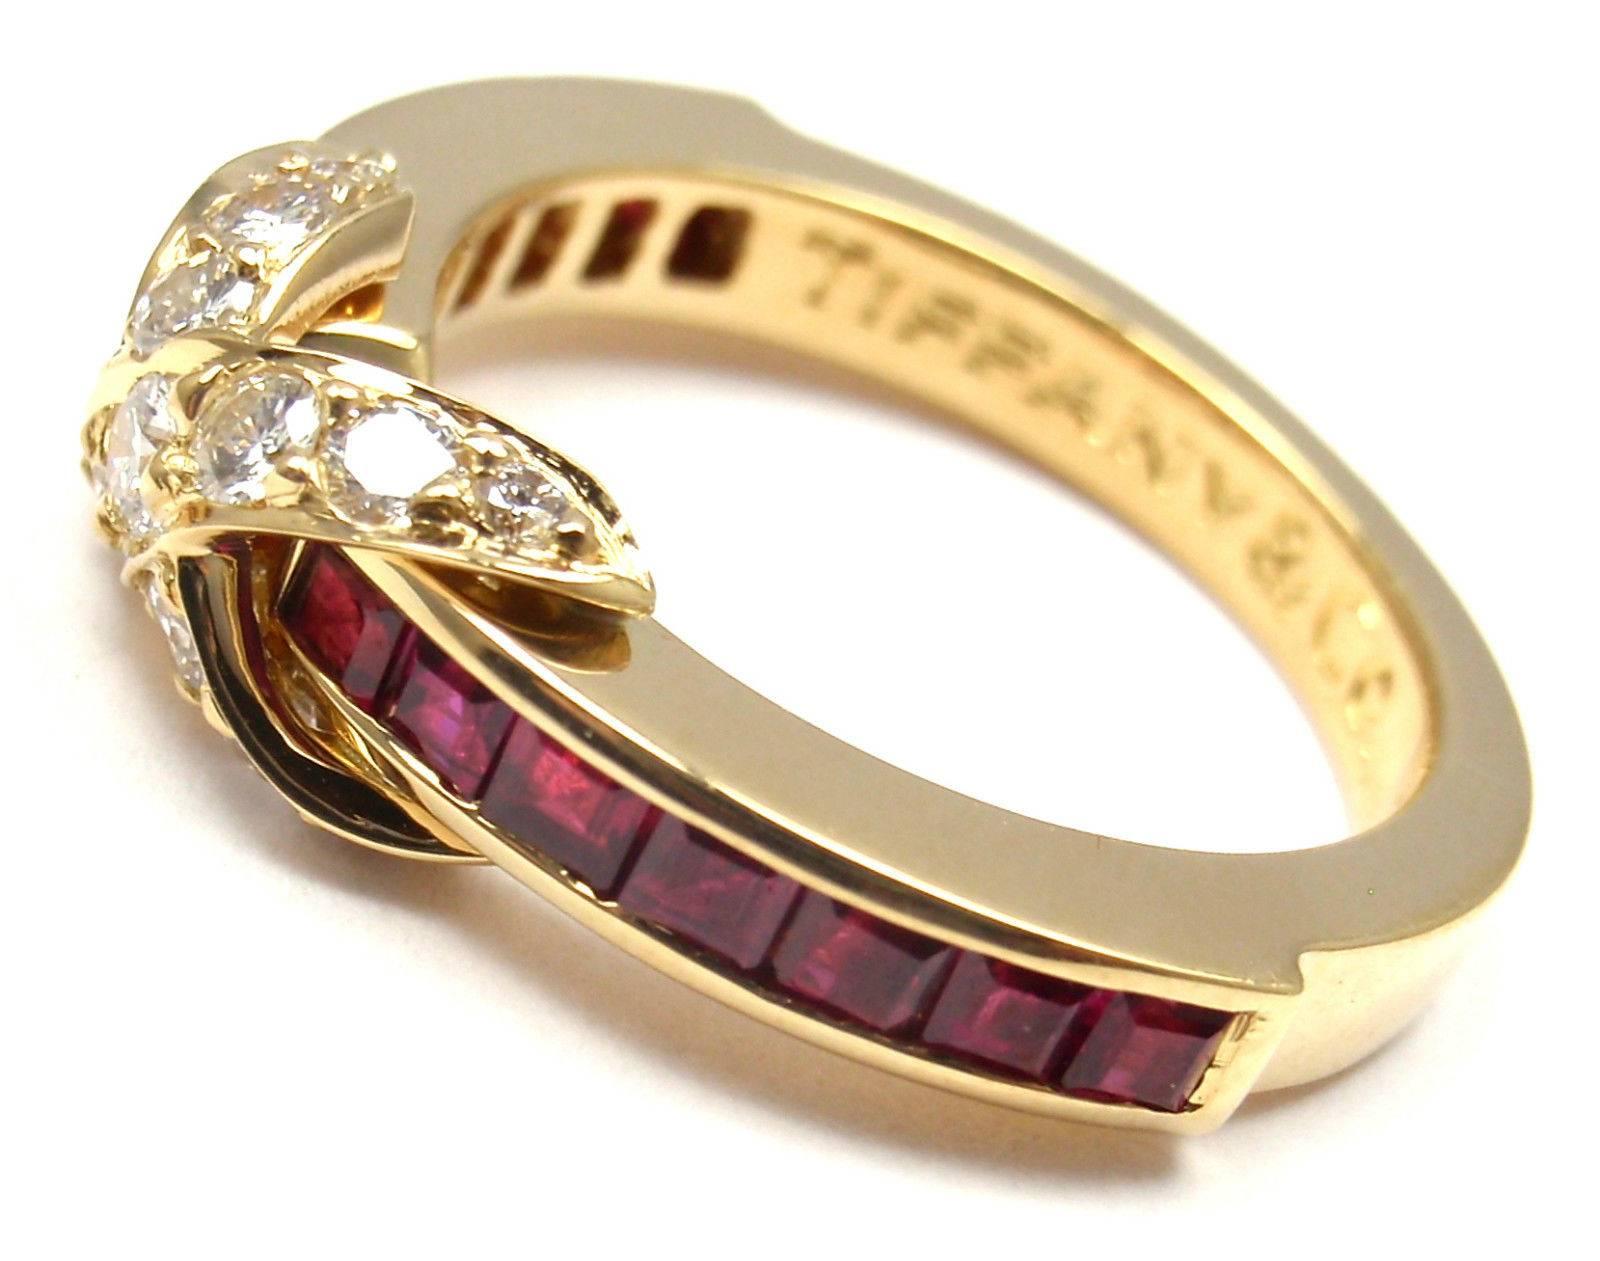 18k Yellow Gold Diamond X Ruby Ring by Tiffany & Co.
With 14 round shape diamonds VS1 clarity G color
total weight approx. .28ct and 14 rubies.

Details: 
Ring Size: 4 3/4, can be resized.
Weight: 4.7 grams
Width: 6mm
Stamped Hallmarks: